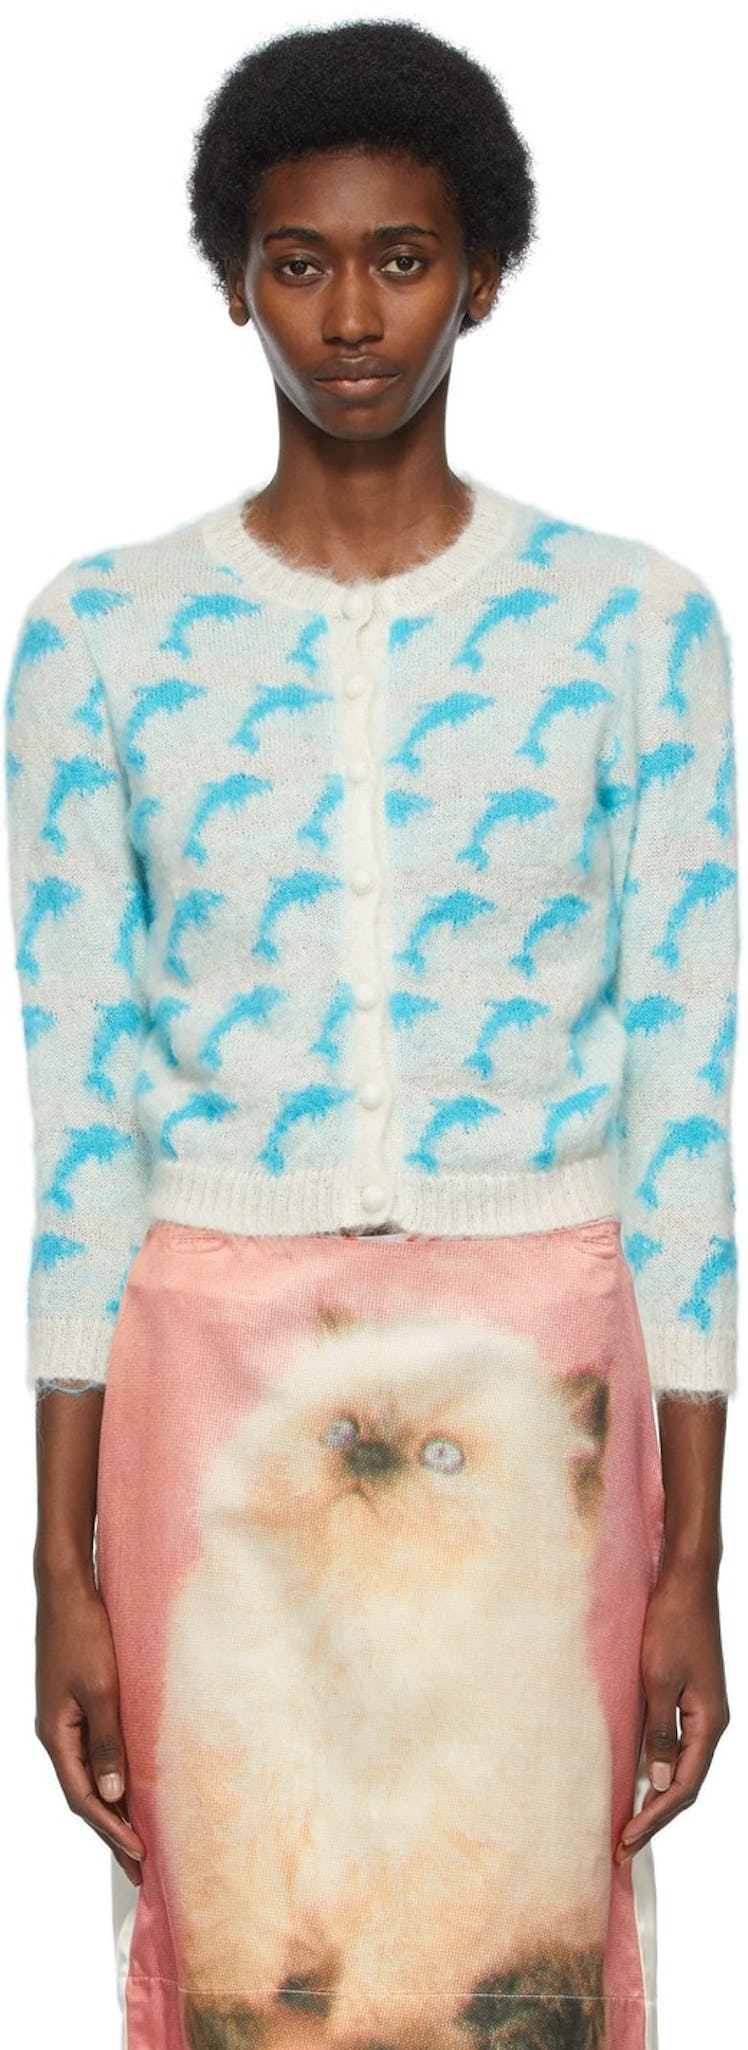 Off-White & Blue Mohair Dolphin Cardigan